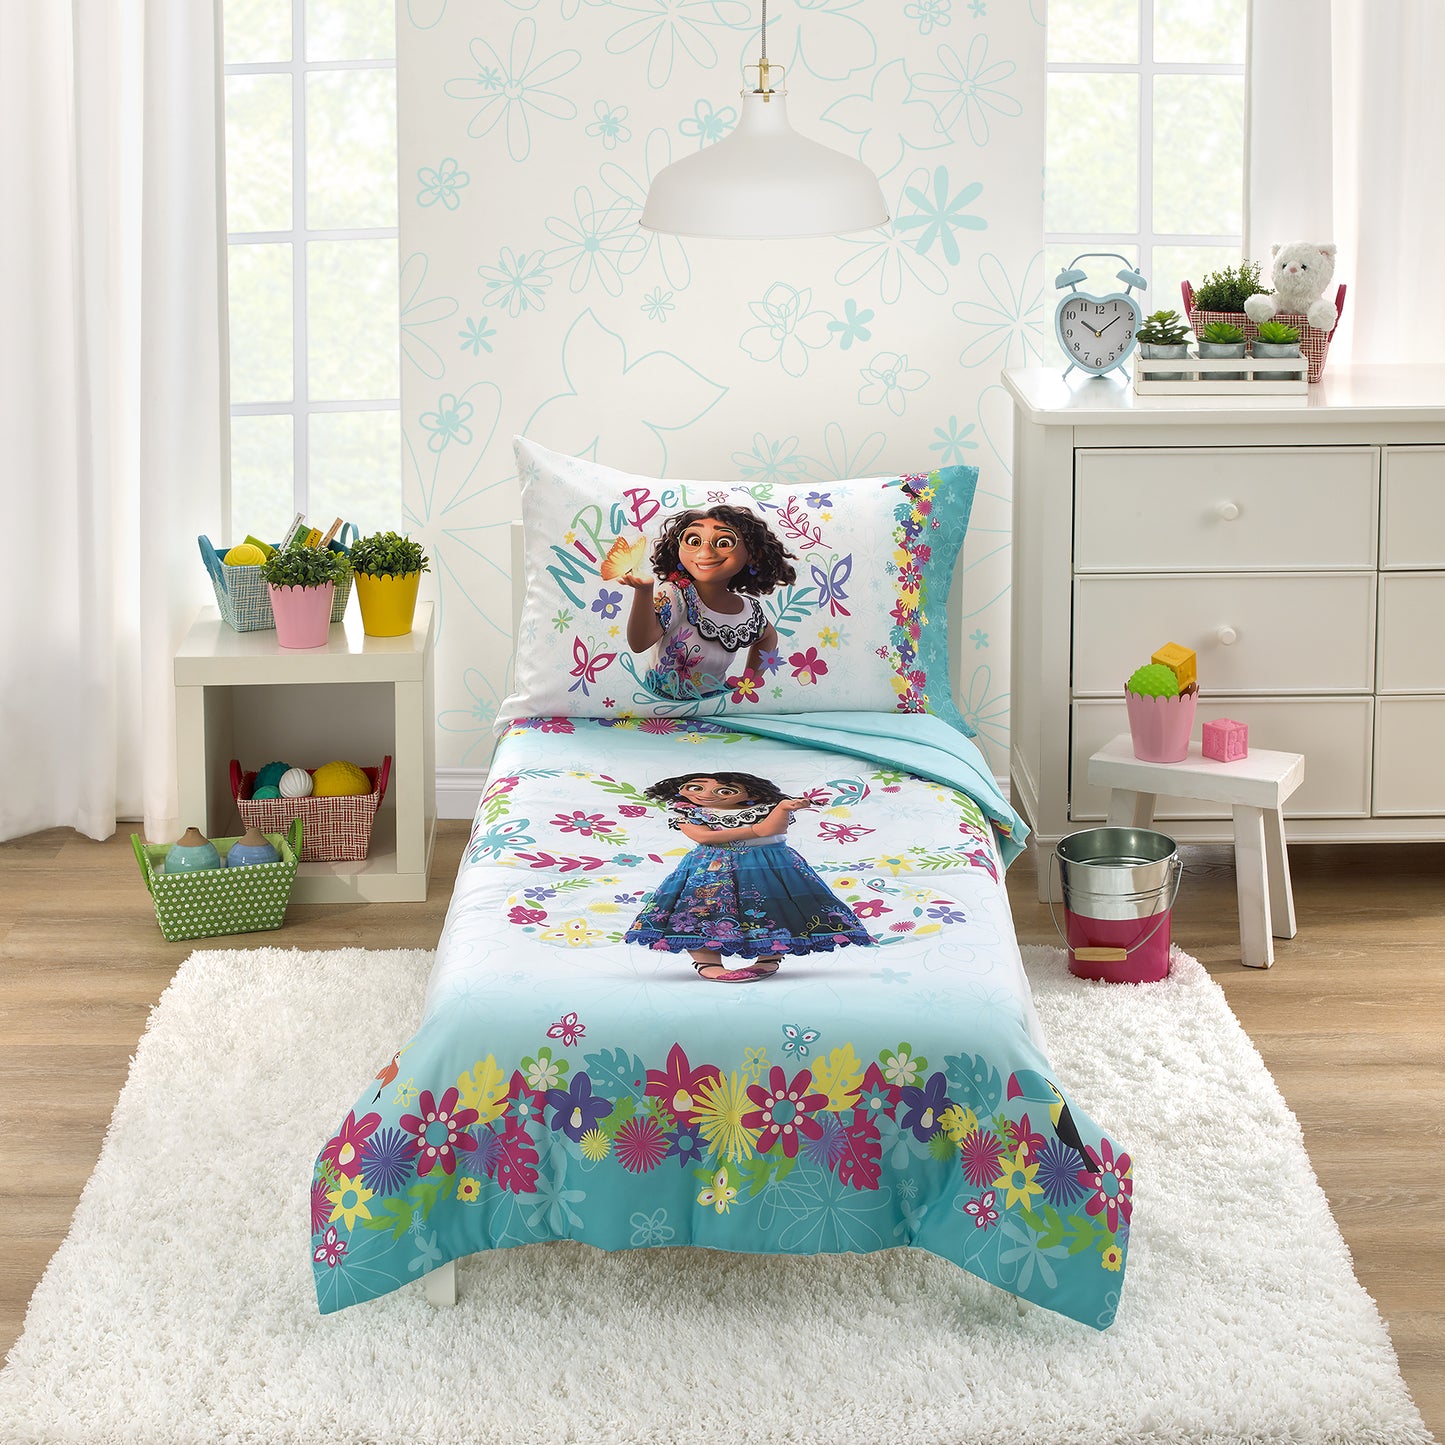 Disney Encanto Tropical Delight Pink and Aqua Flowers and Butterflies 4 Piece Toddler Bedding Set - Comforter, Fitted Bottom Sheet, Flat Top Sheet and Reversible Pillowcase